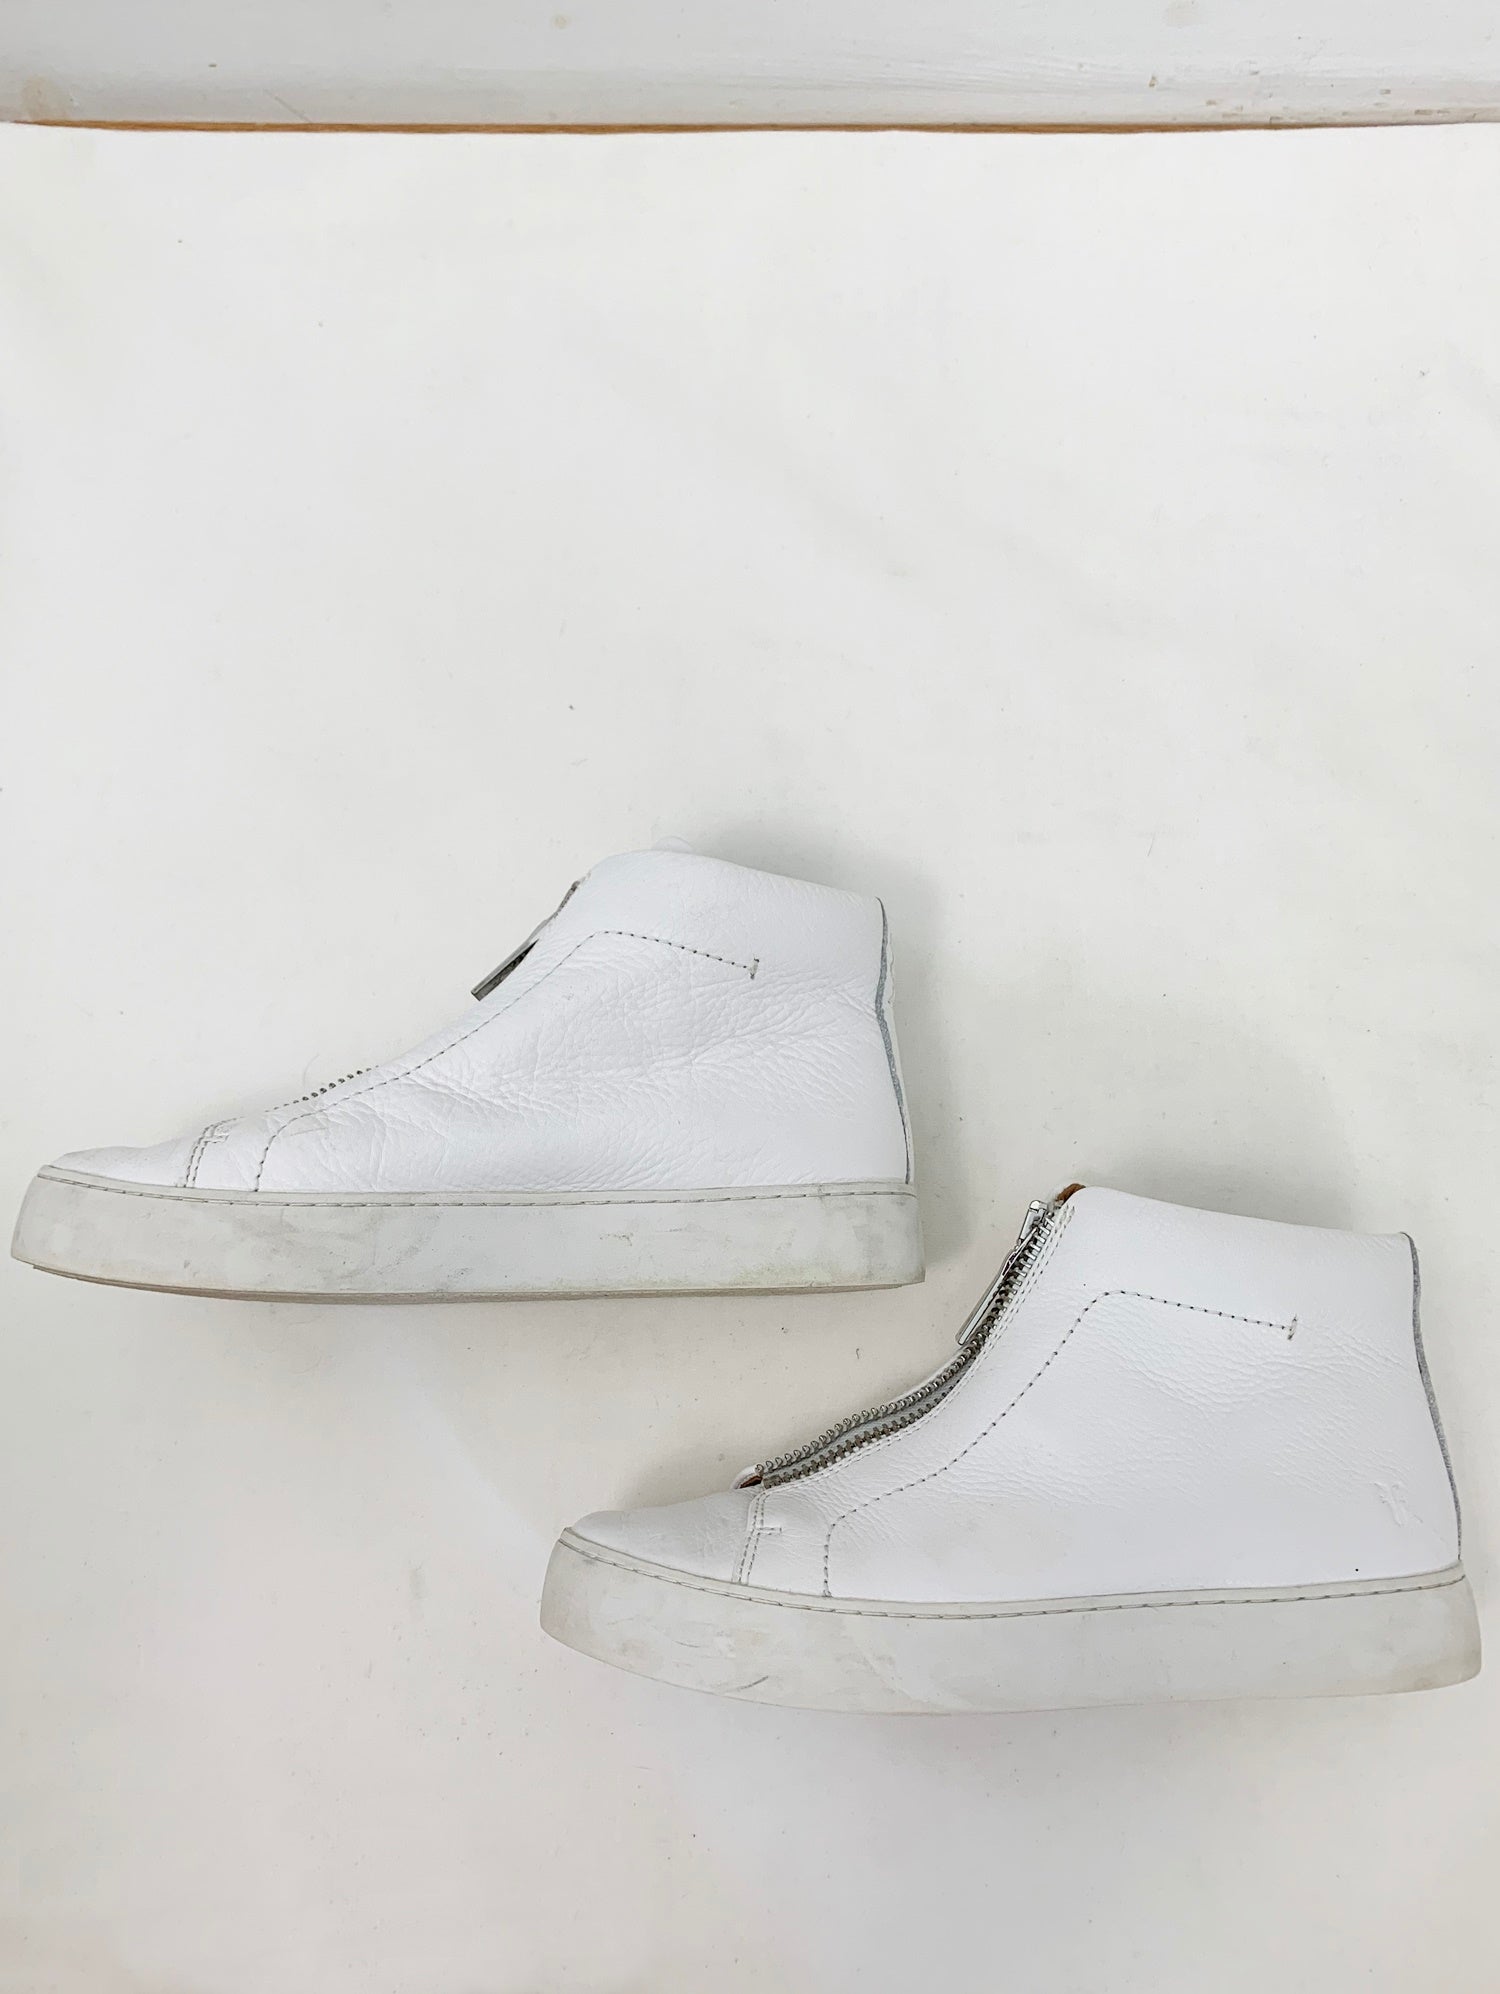 Lena High Leather Sneakers Size 8